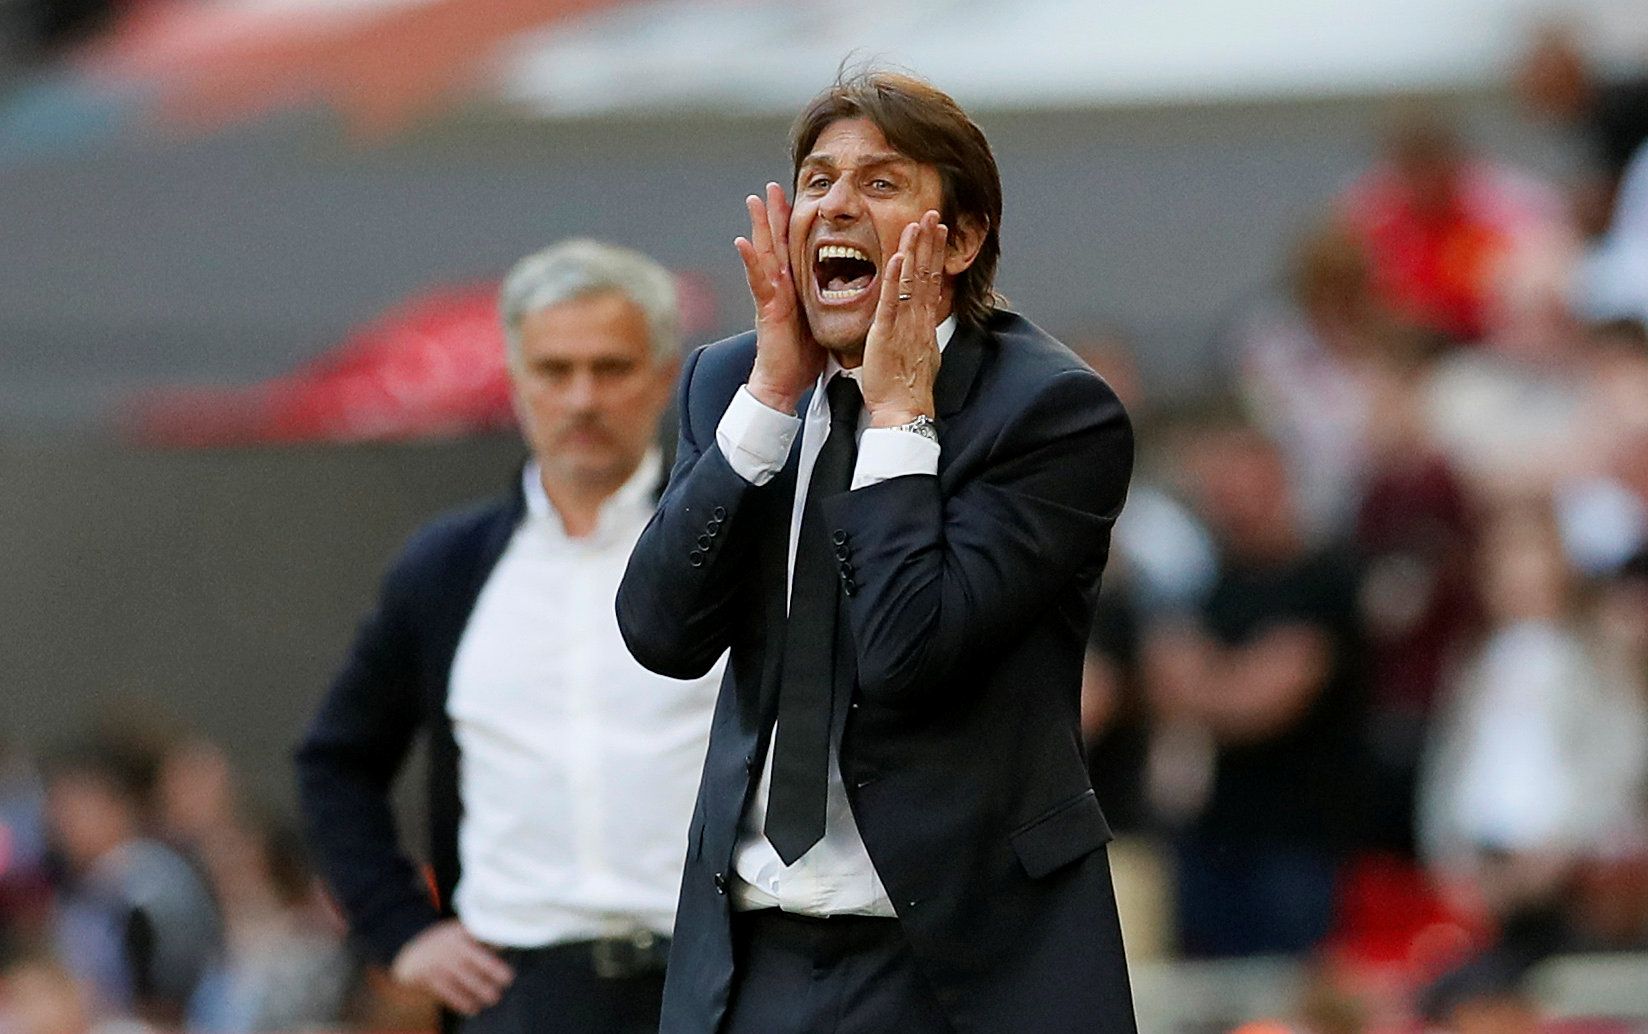 Soccer Football - FA Cup Final - Chelsea vs Manchester United - Wembley Stadium, London, Britain - May 19, 2018   Chelsea manager Antonio Conte reacts during the match   REUTERS/David Klein